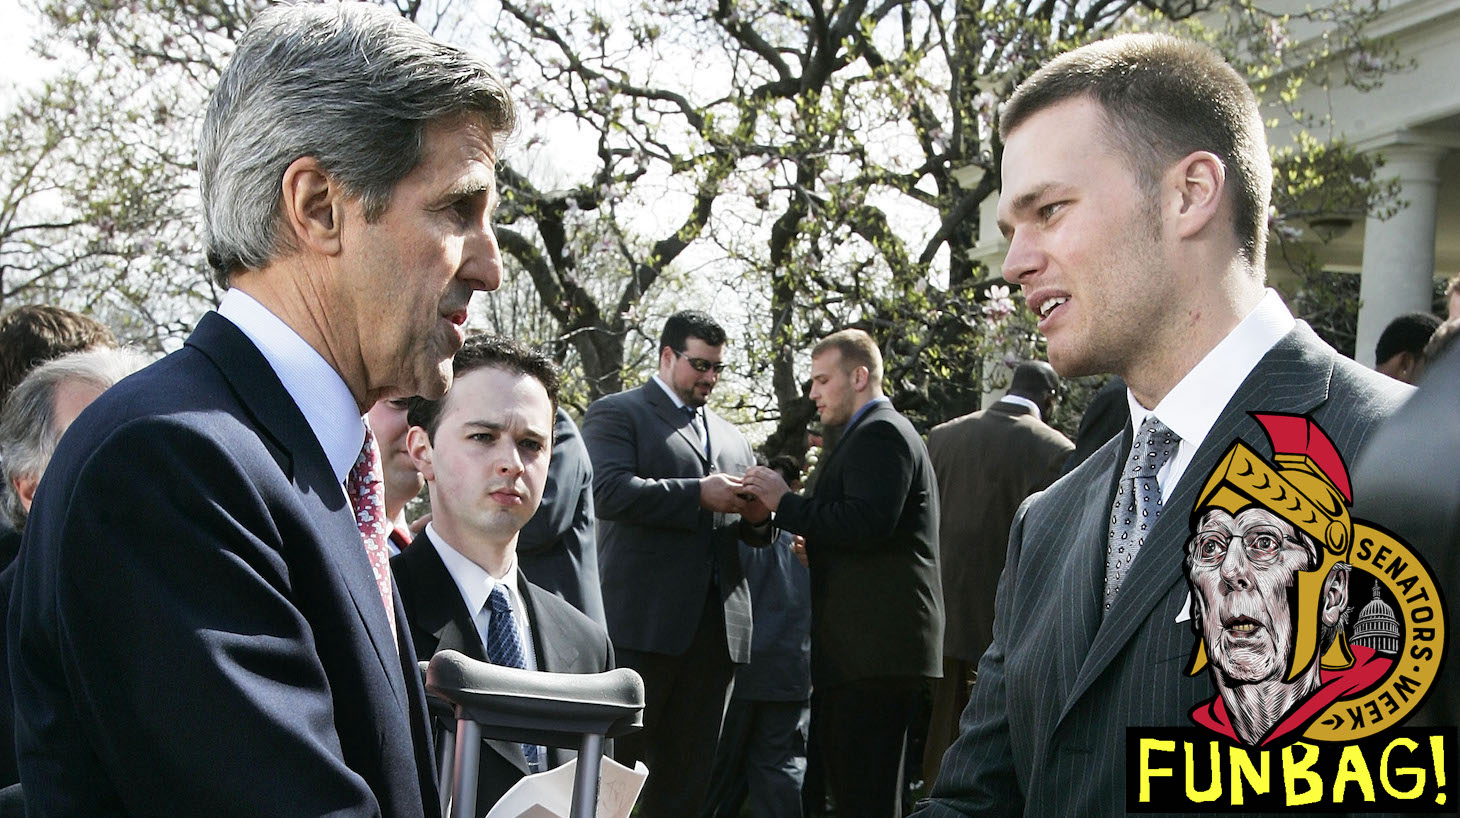 WASHINGTON - APRIL 13: U.S. Senator John Kerry (D-MA) (L) shakes hands with Patriot's quarterback Tom Brady after a Rose Garden event to honor the Super Bowl Champion's the New England Patriots April 13, 2005 at the White House in Washington, DC. Kerry had knee surgery recently. (Photo by Alex Wong/Getty Images)